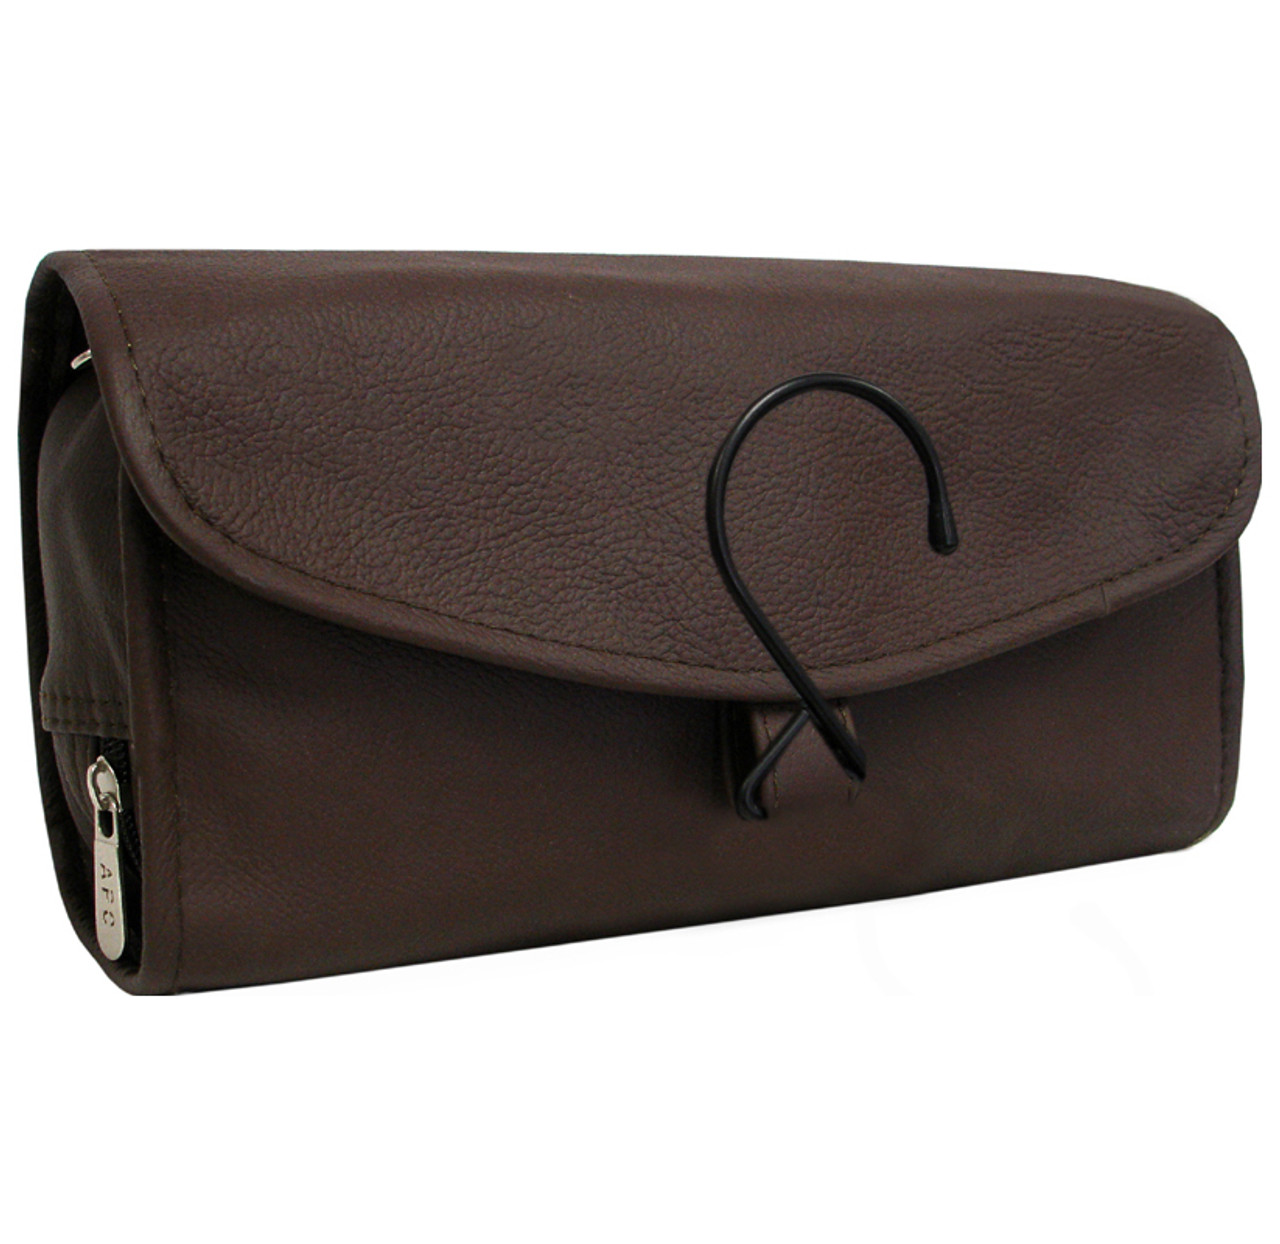 Hanging All-Leather Toiletry Bag Travel Kit product image